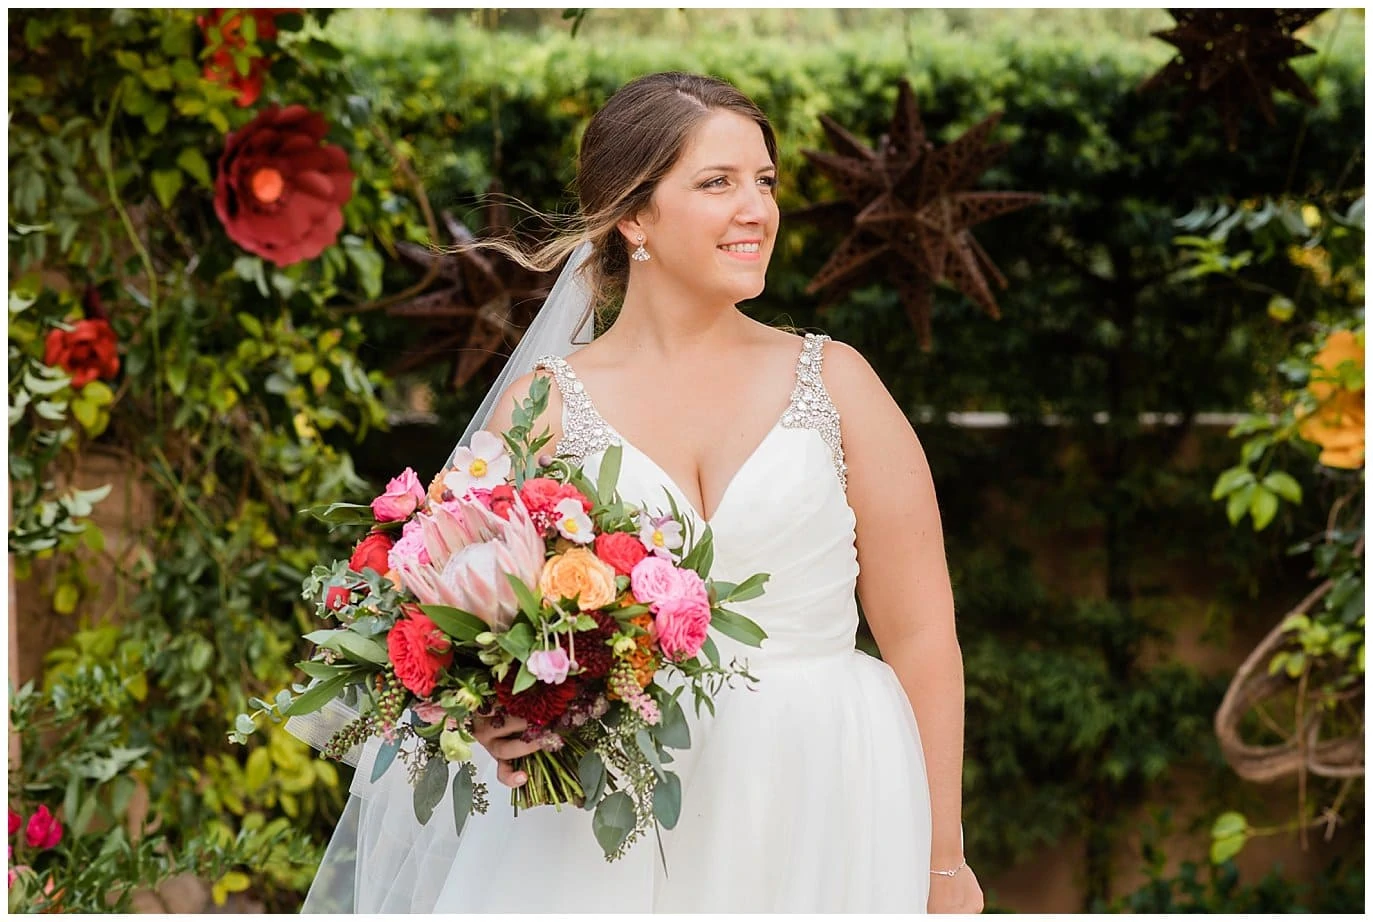 california bride with colorful wedding bouquet and hayley paige dress